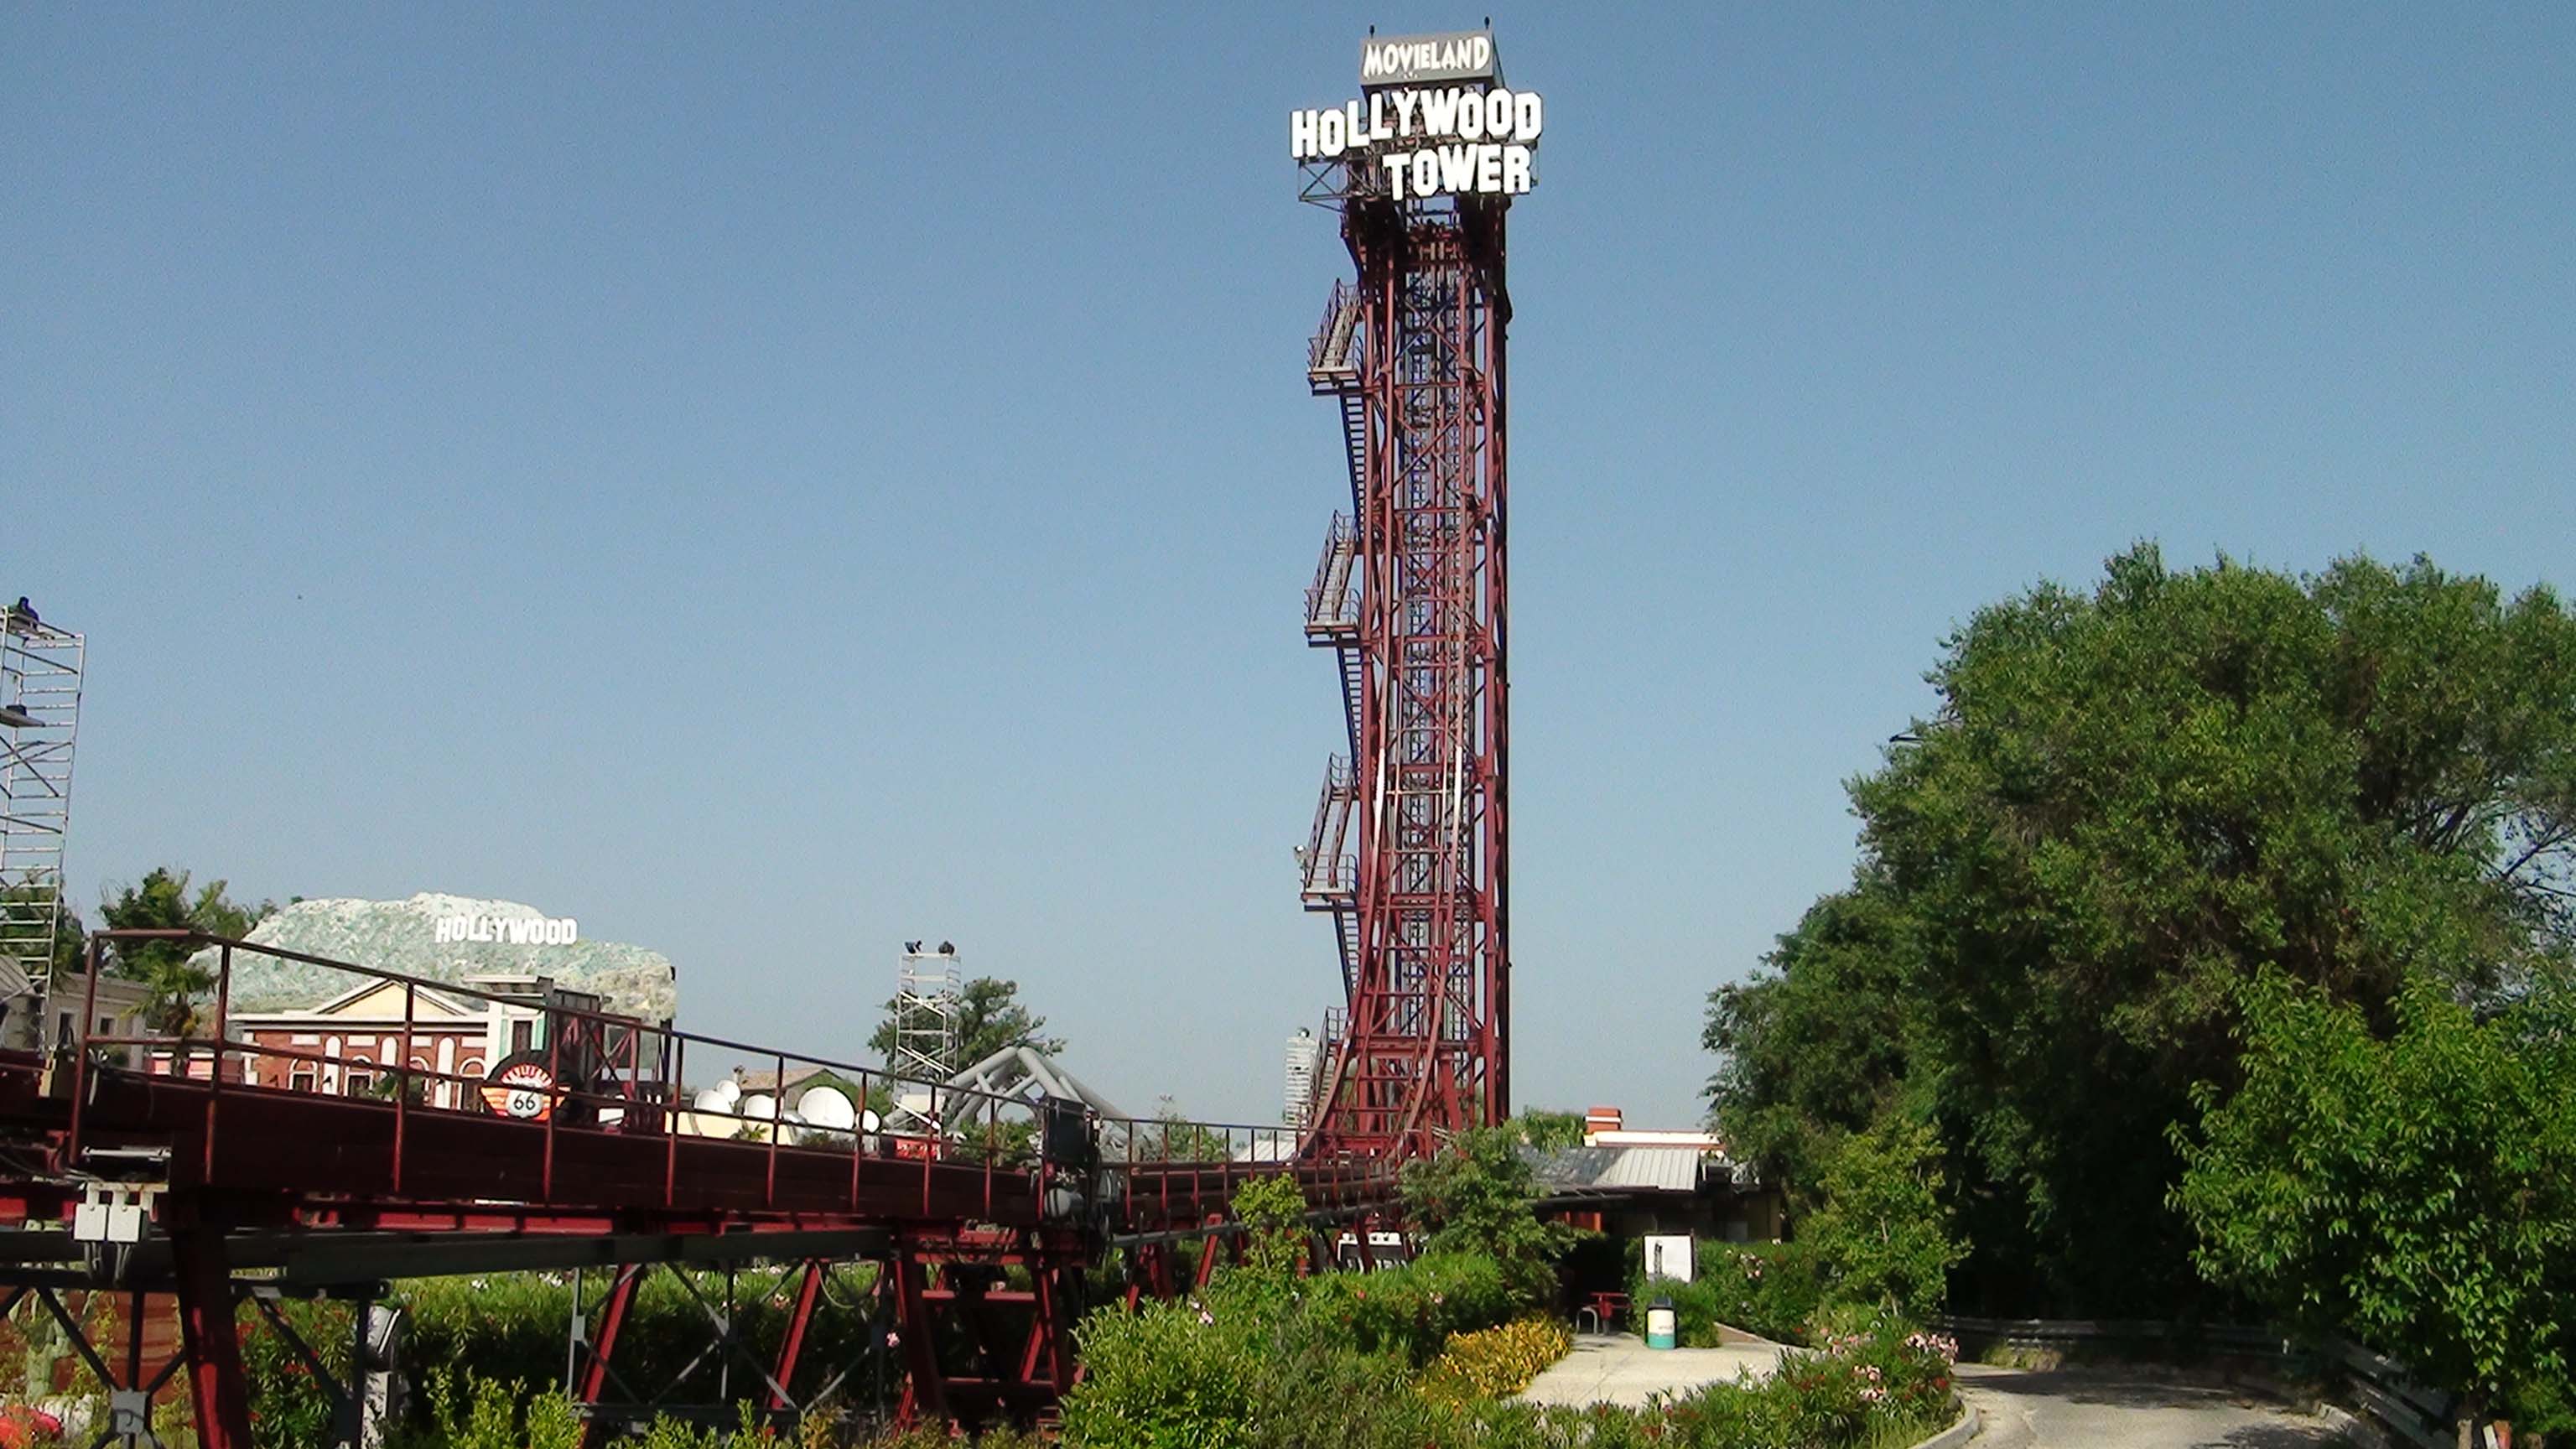 Movieland Studios - Hollywood Action Tower